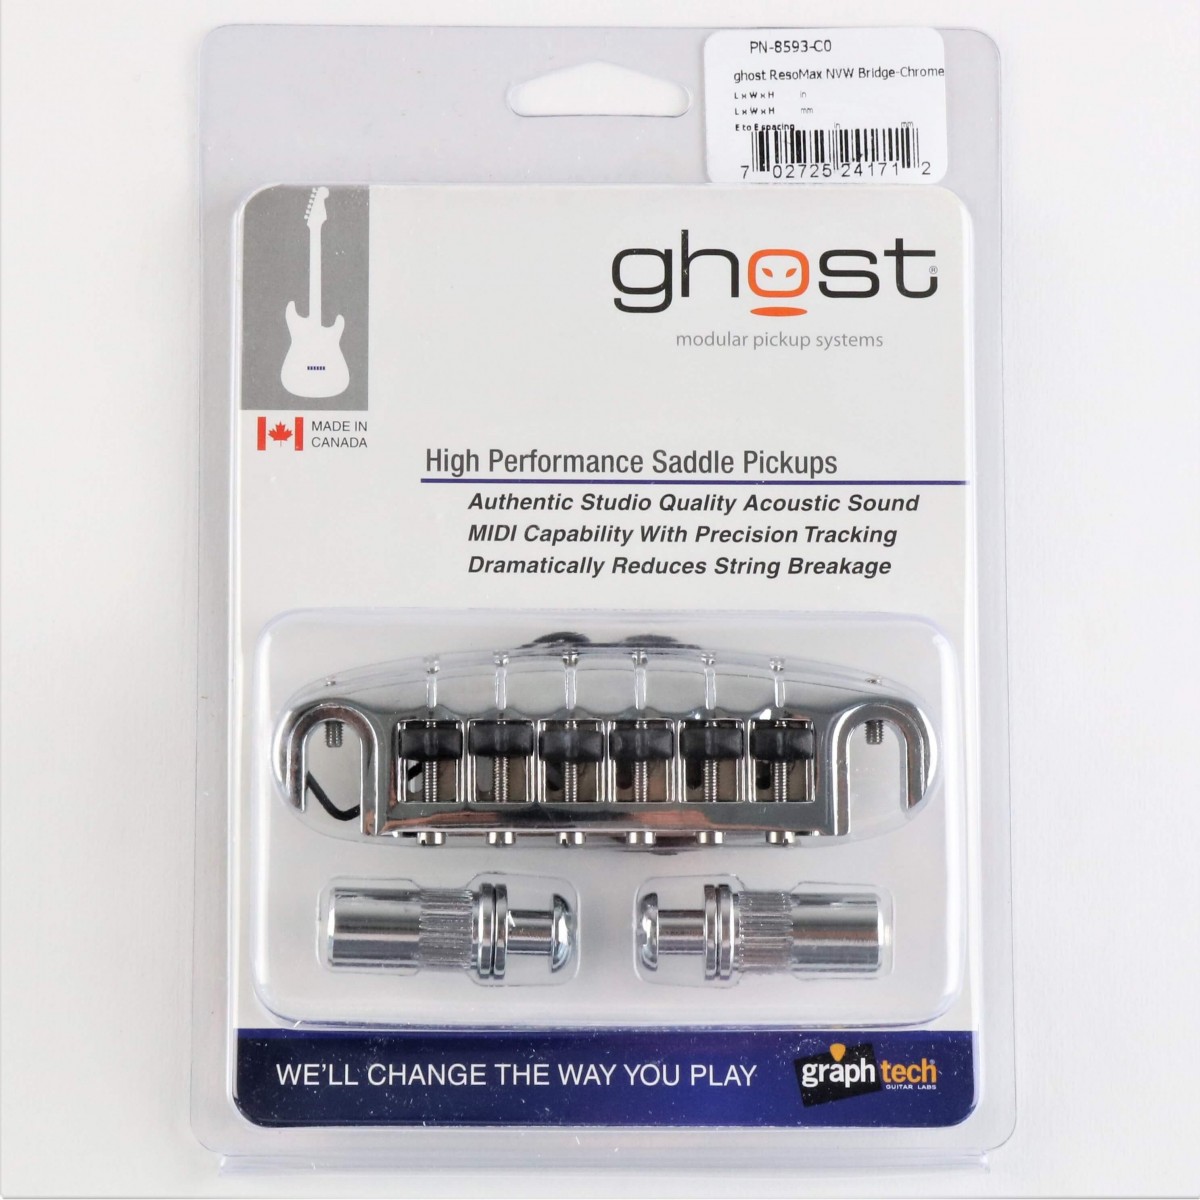 GRAPH TECH PN-8593-CO GHOST LOADED RESOMAX NVW CHROME